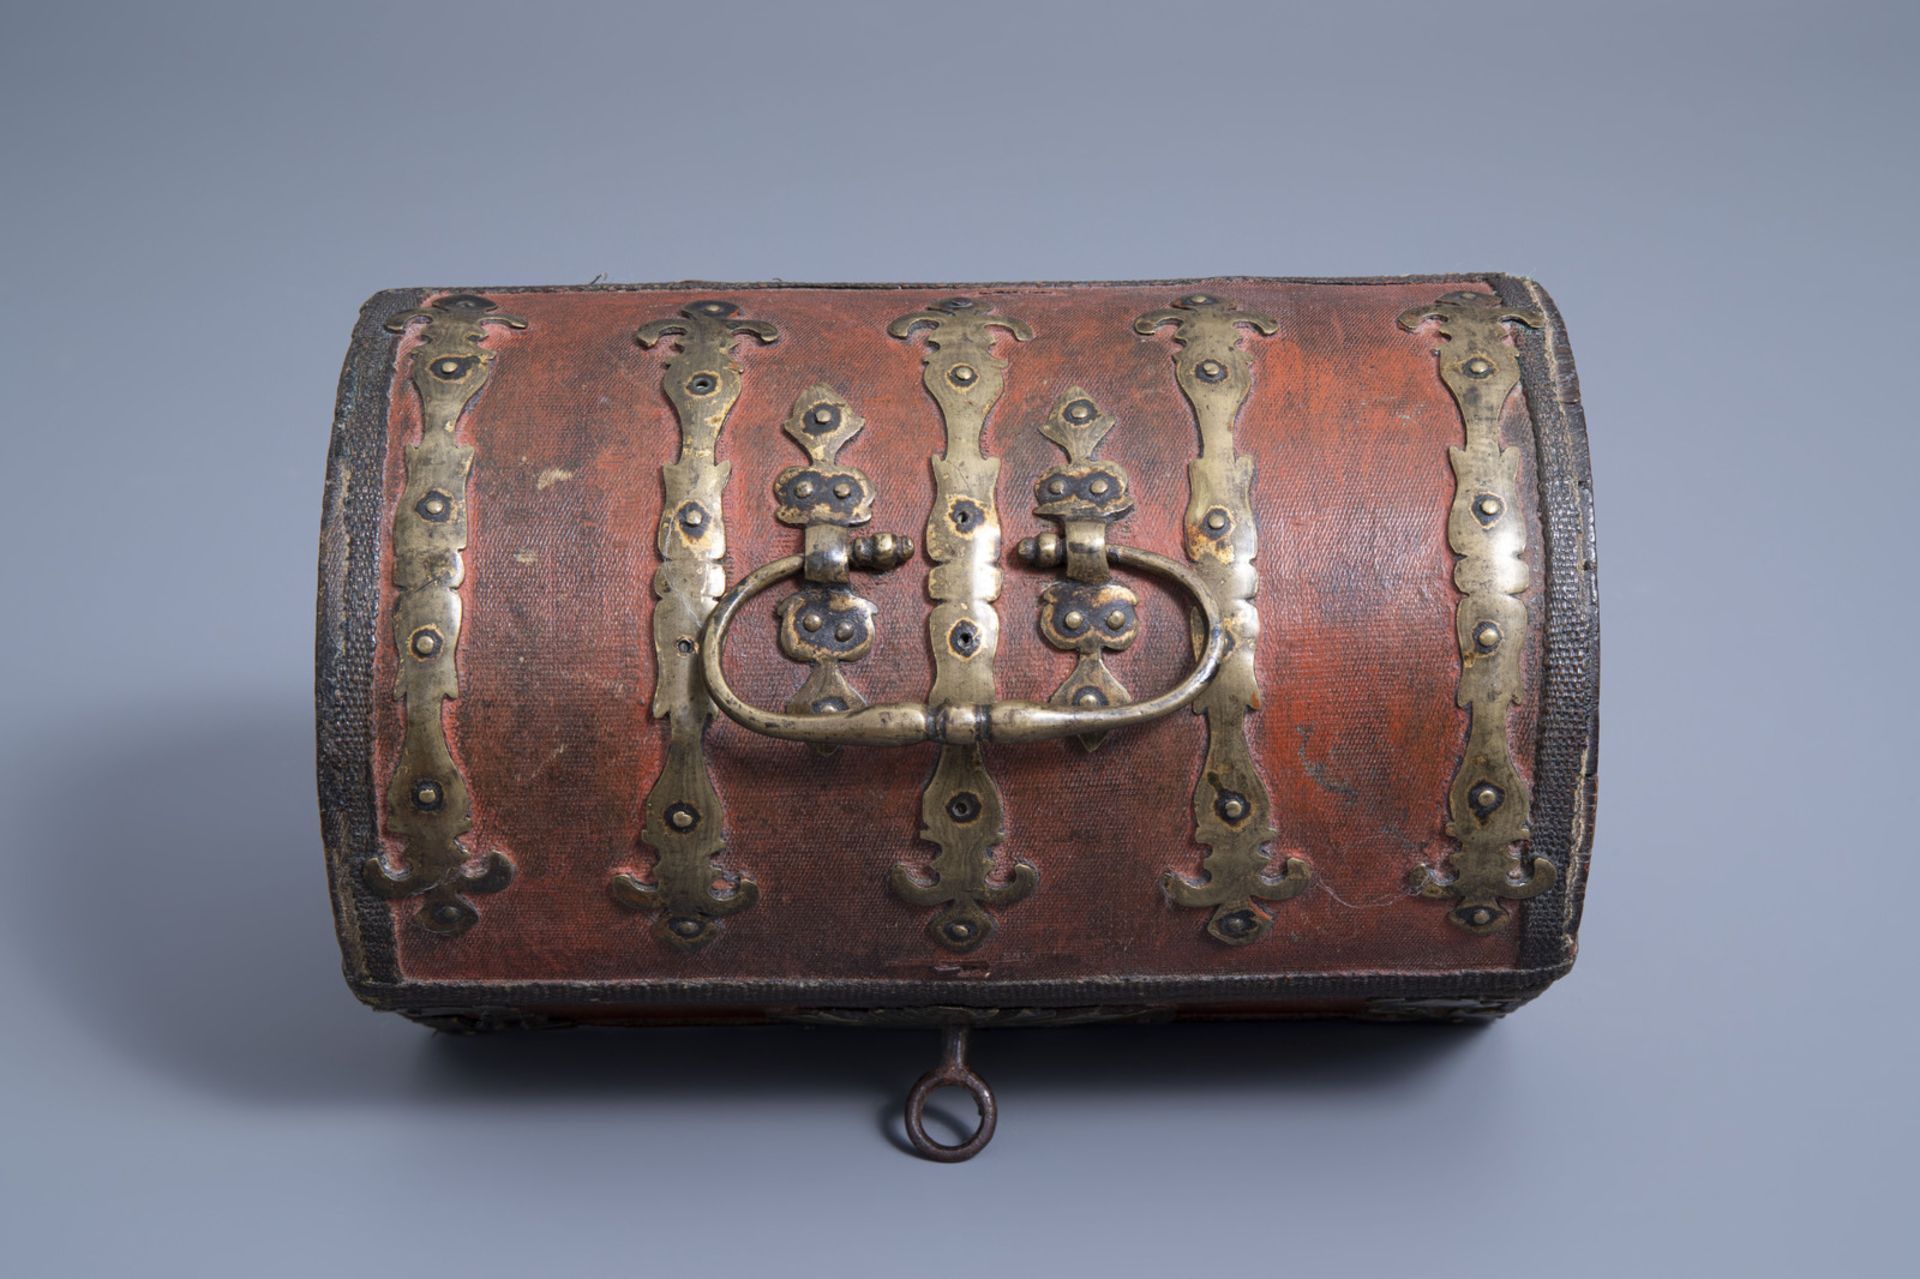 A French brass mounted and lined wooden jewelry or valuables box, 18th C. - Image 7 of 8